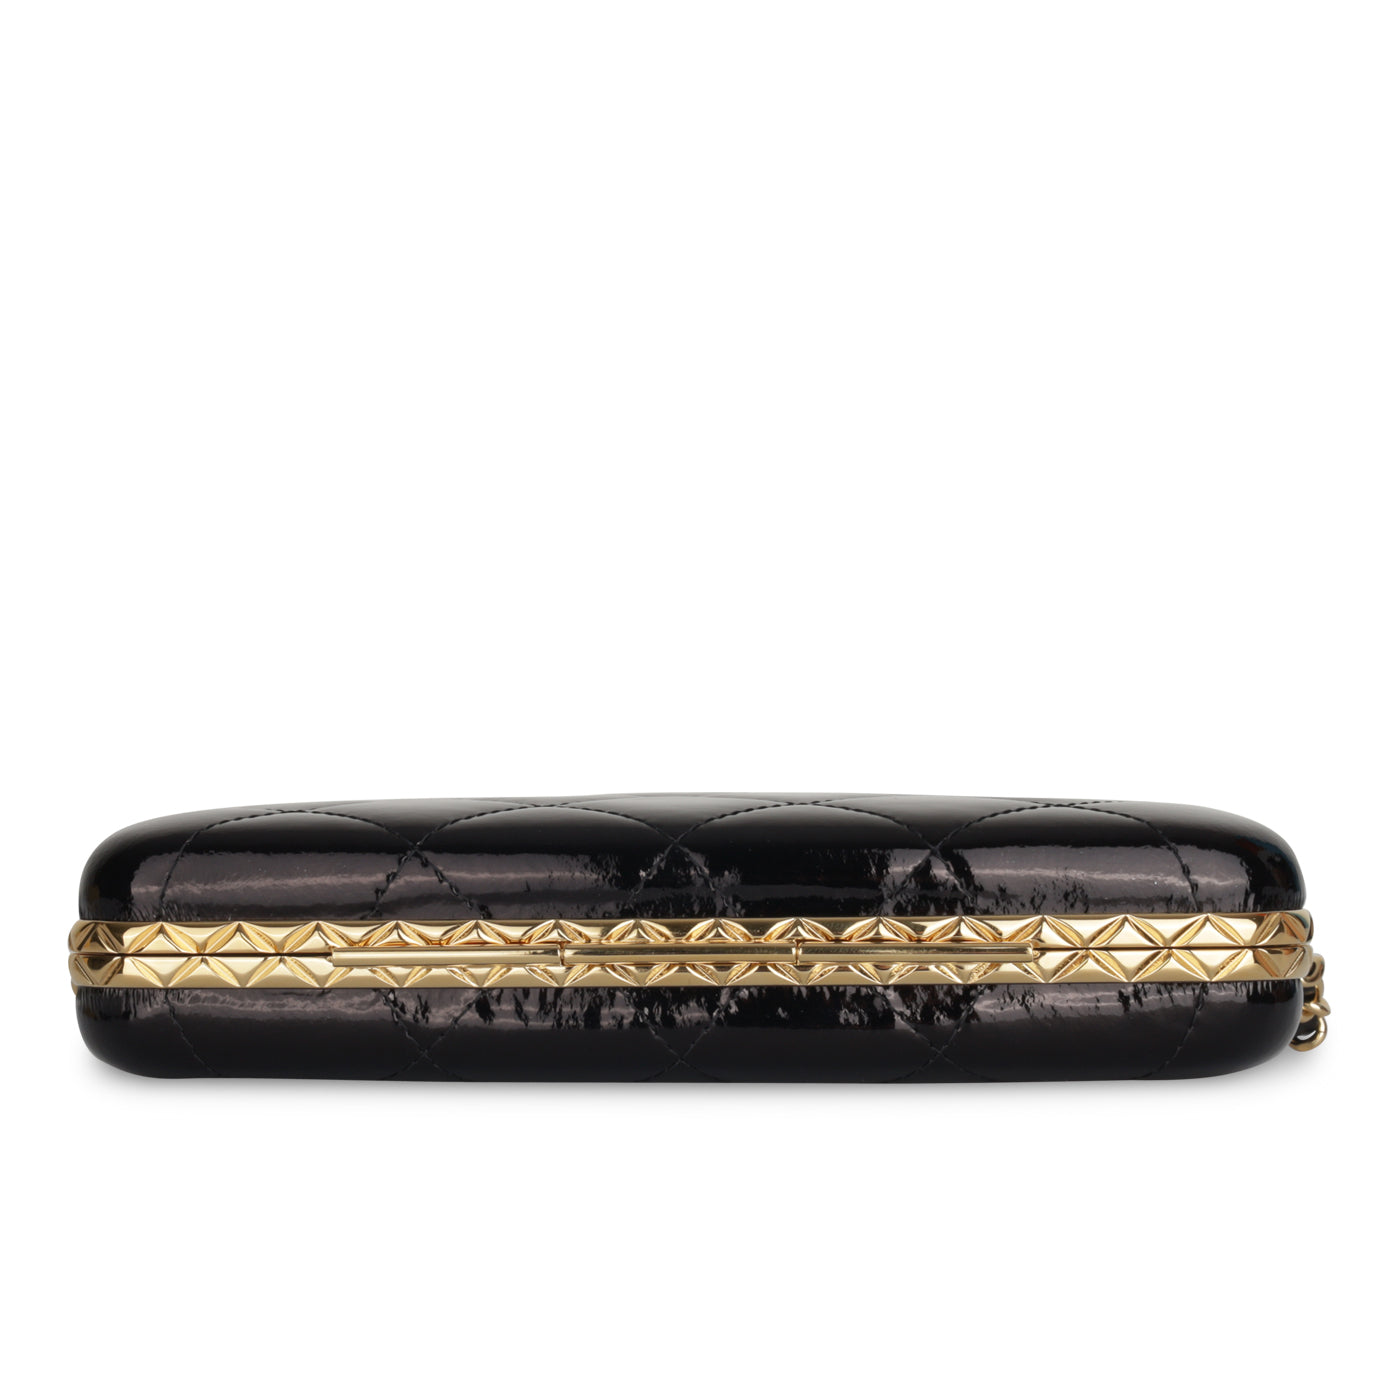 Chanel - Box Clutch on Chain - Black Patent - CGHW - Mint